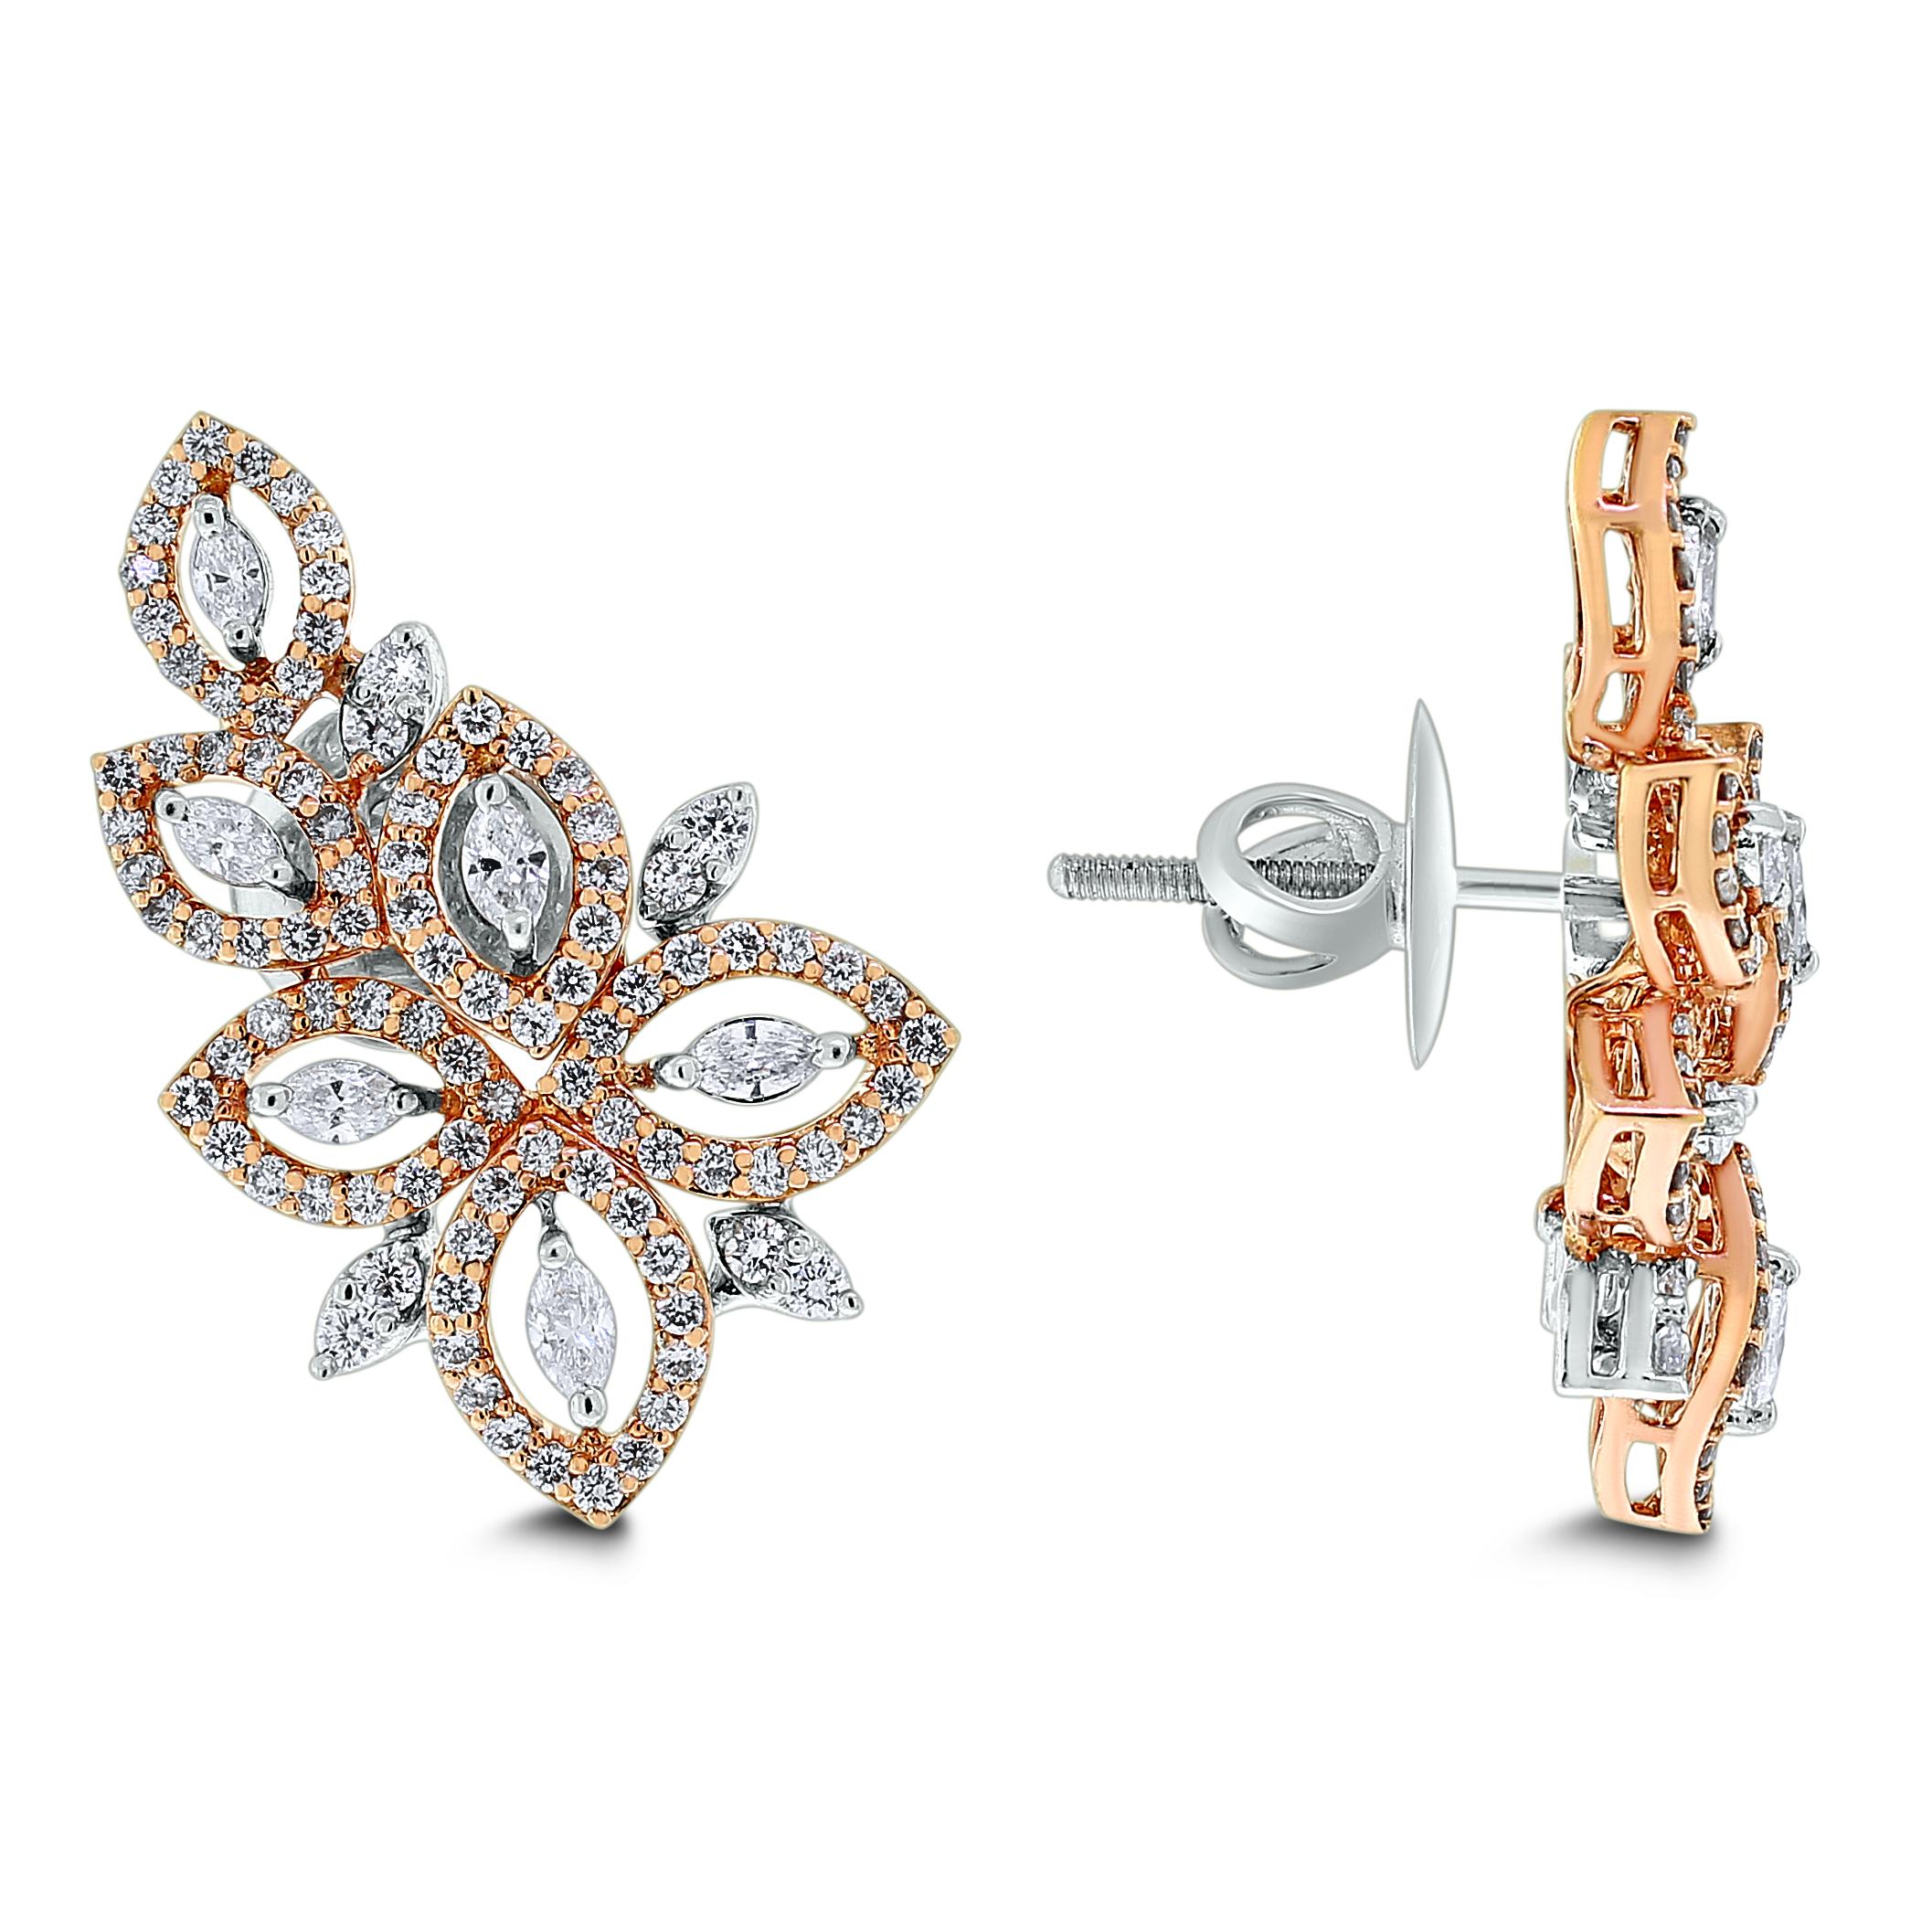 The Beauvince Gaia Diamond Earrings are delicate & sensual celebrating the blossoming of spring. Delicate ear climbers, they are unique and stylish. 

Total Diamond Weight: 1.86 ct (Earrings)
Diamond Shapes: Marquise & Round
Diamond Color: H - I